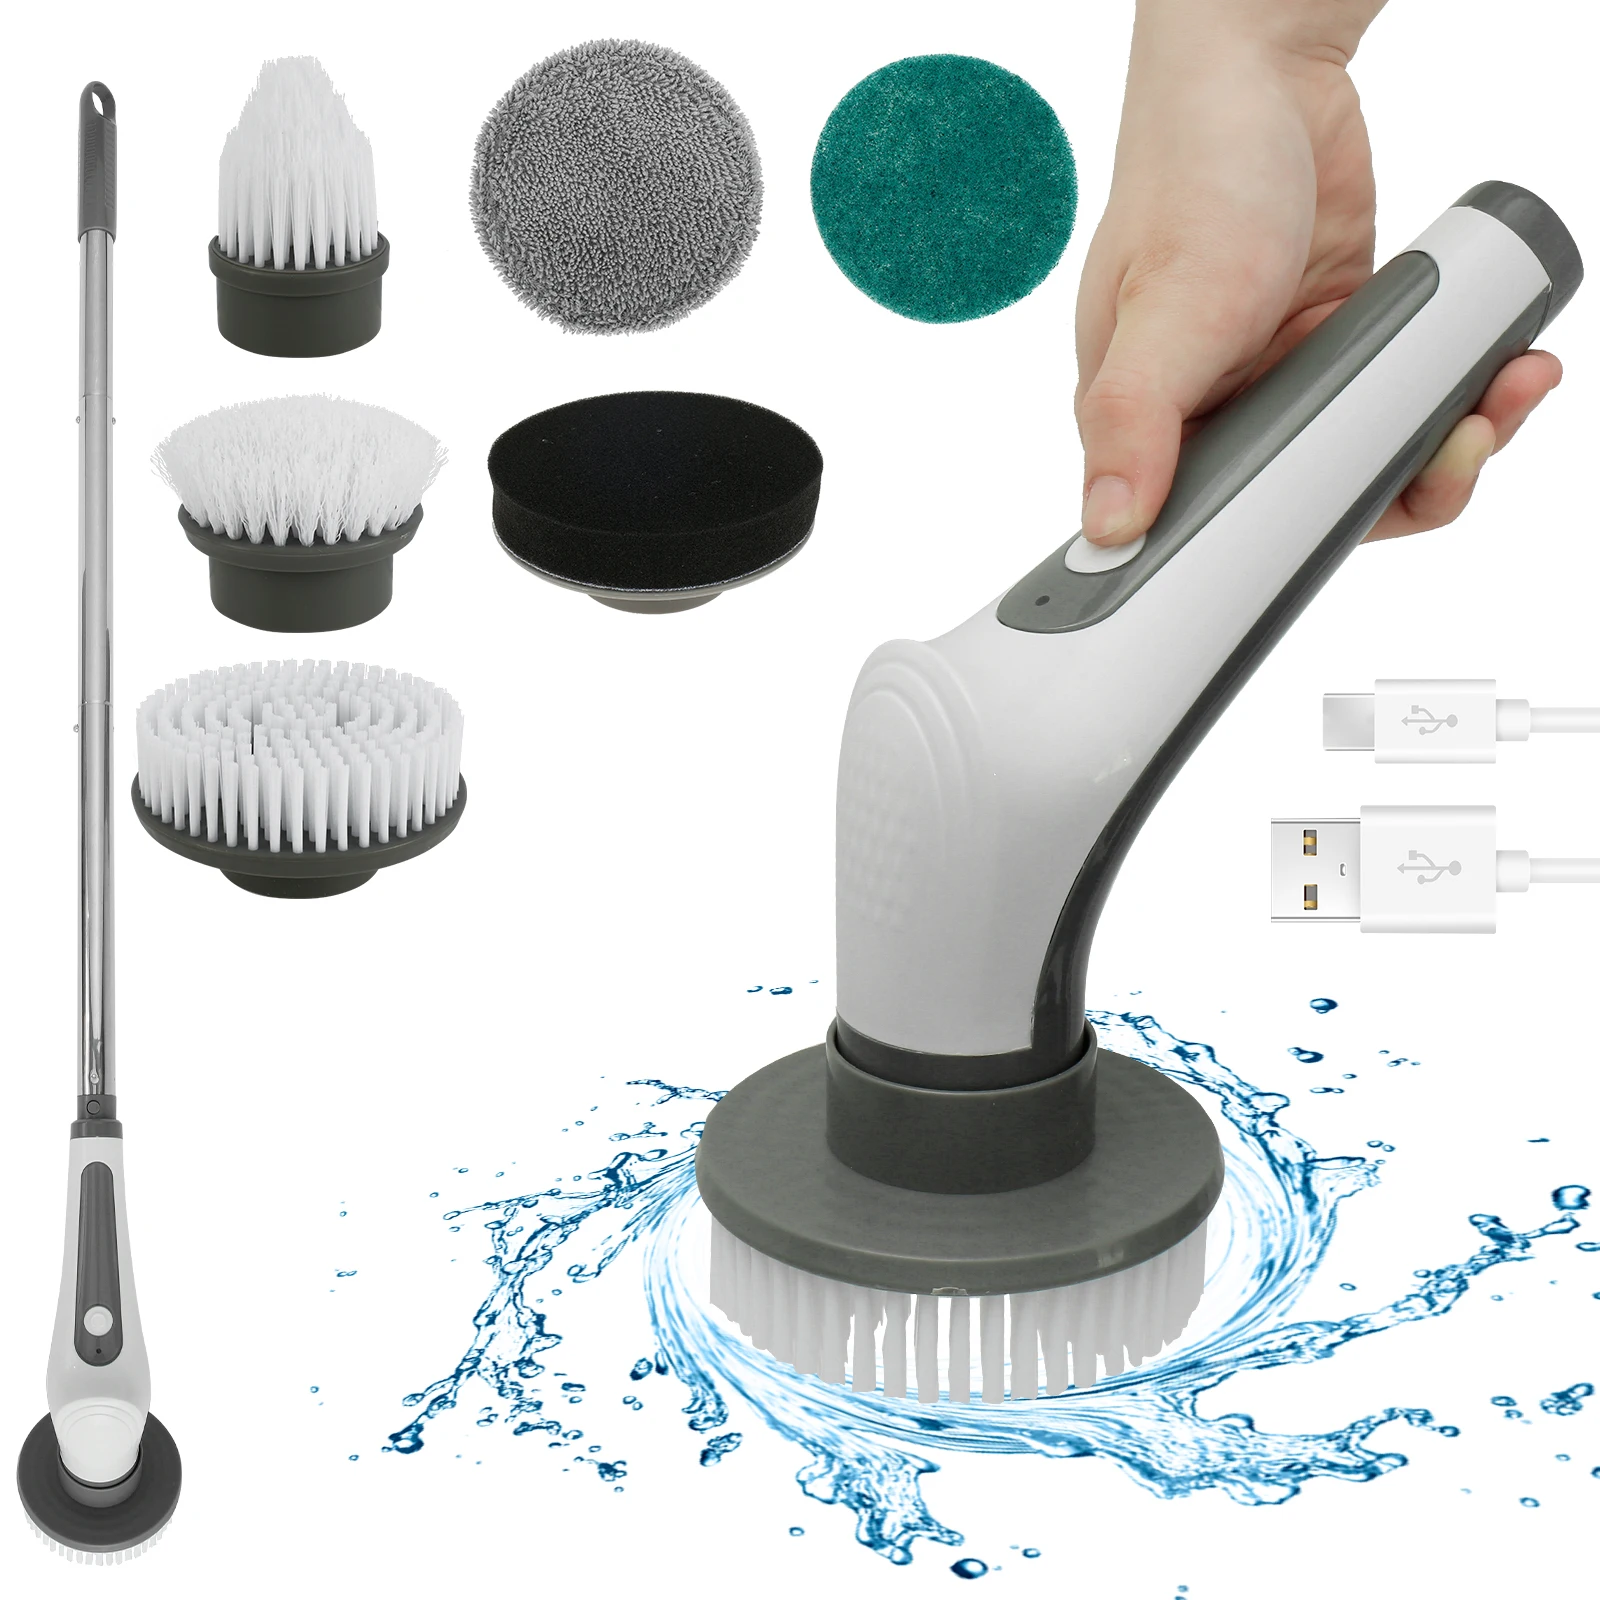 electric-spin-scrubber-with-6-replacement-brush-heads-ipx8-waterproof-spinning-scrubber-brush-with-removable-handle-cordless